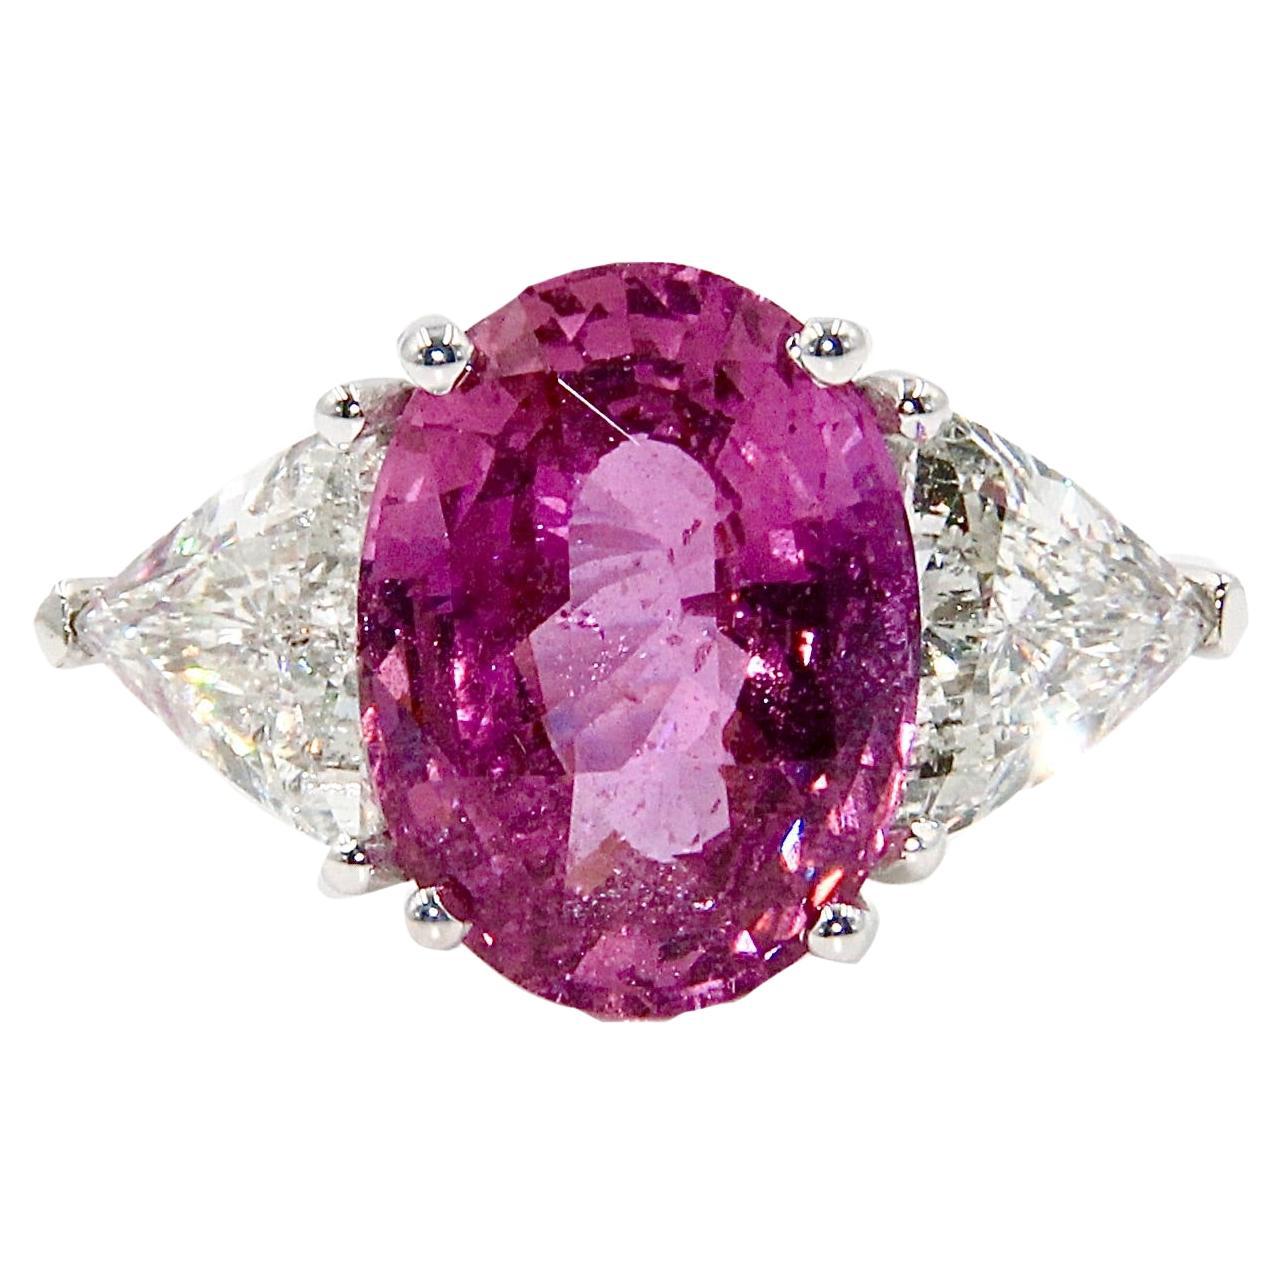 Ceylon Oval Pink Sapphire of 6.57 Carats and Diamond Ring, 'Gold 18k'